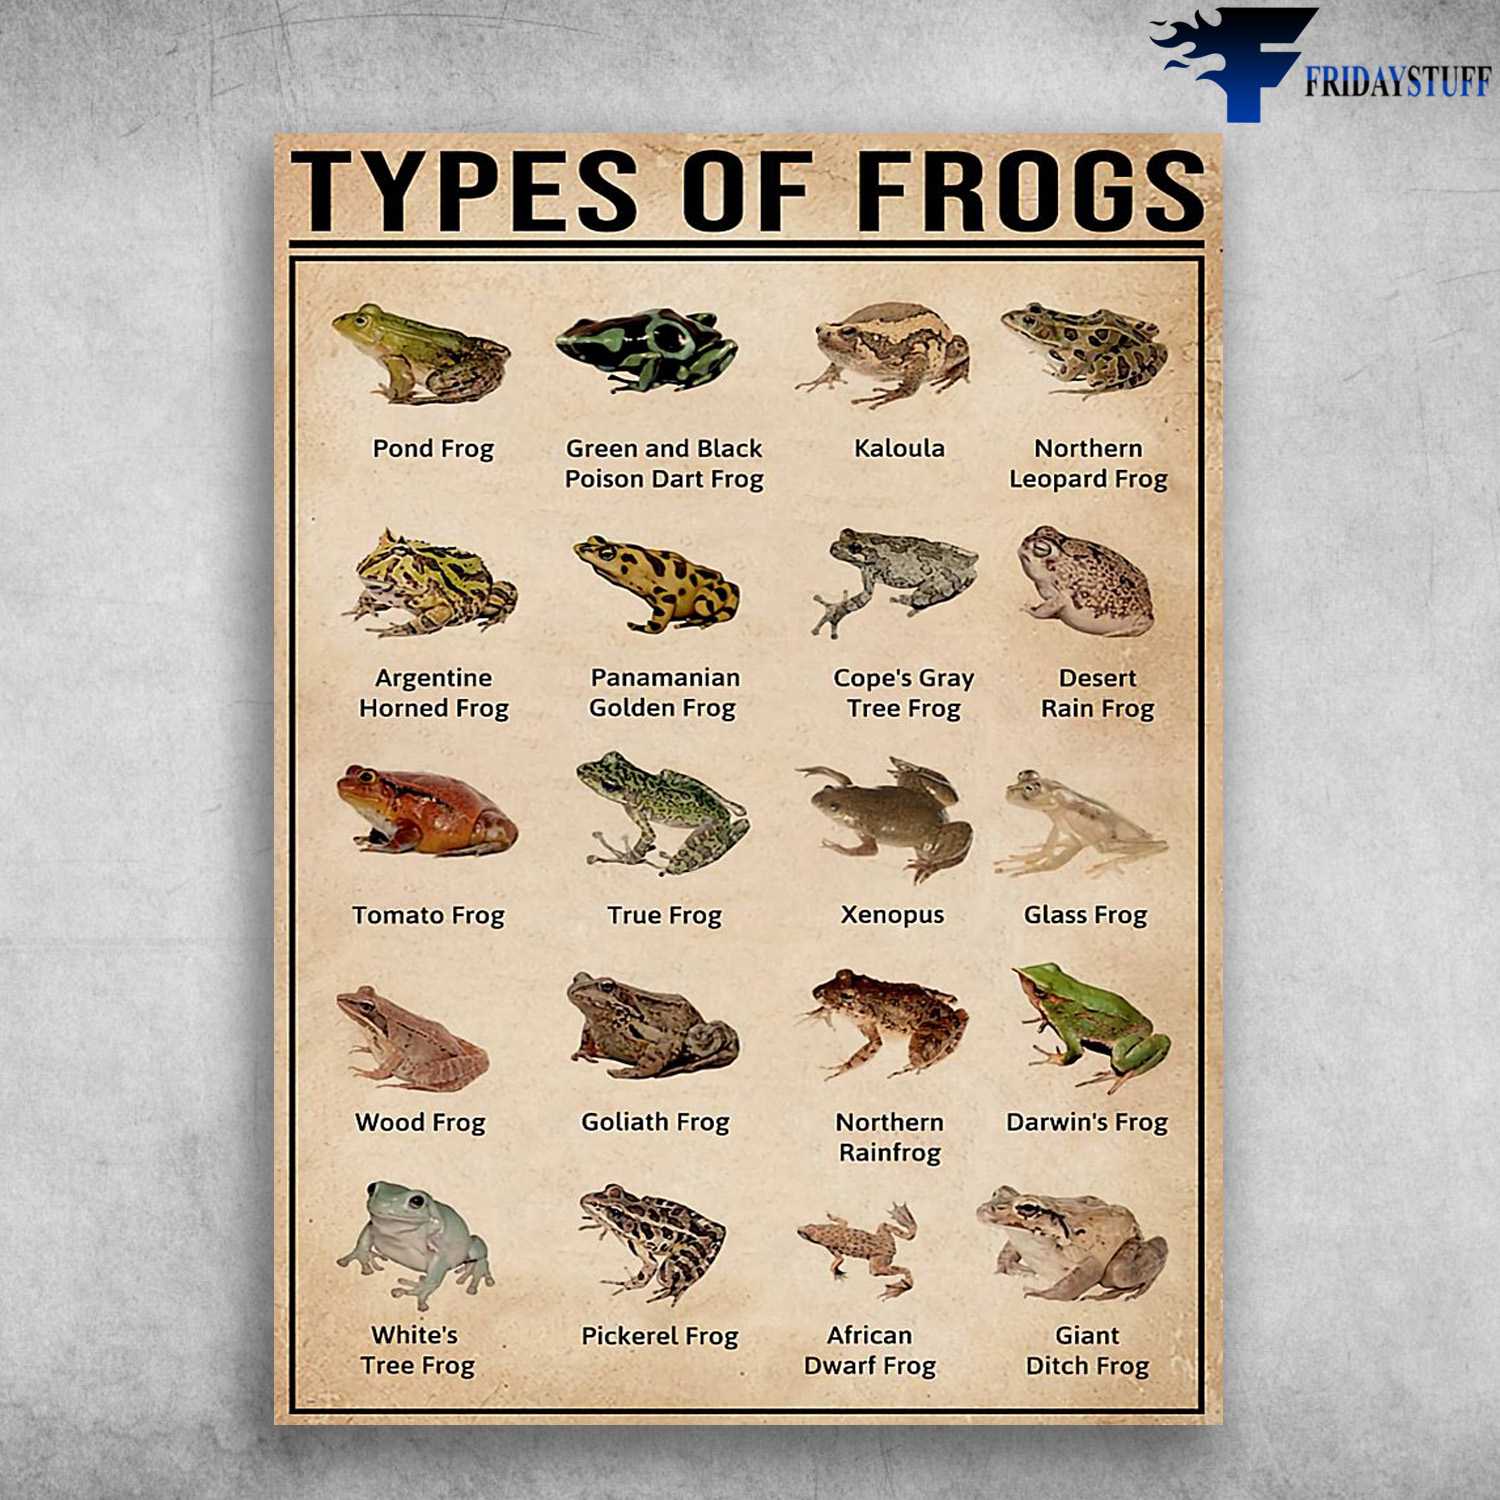 Types Of Frogs, Frog Knowledge, Pond Frog, Green And Black Poison Dart Frog